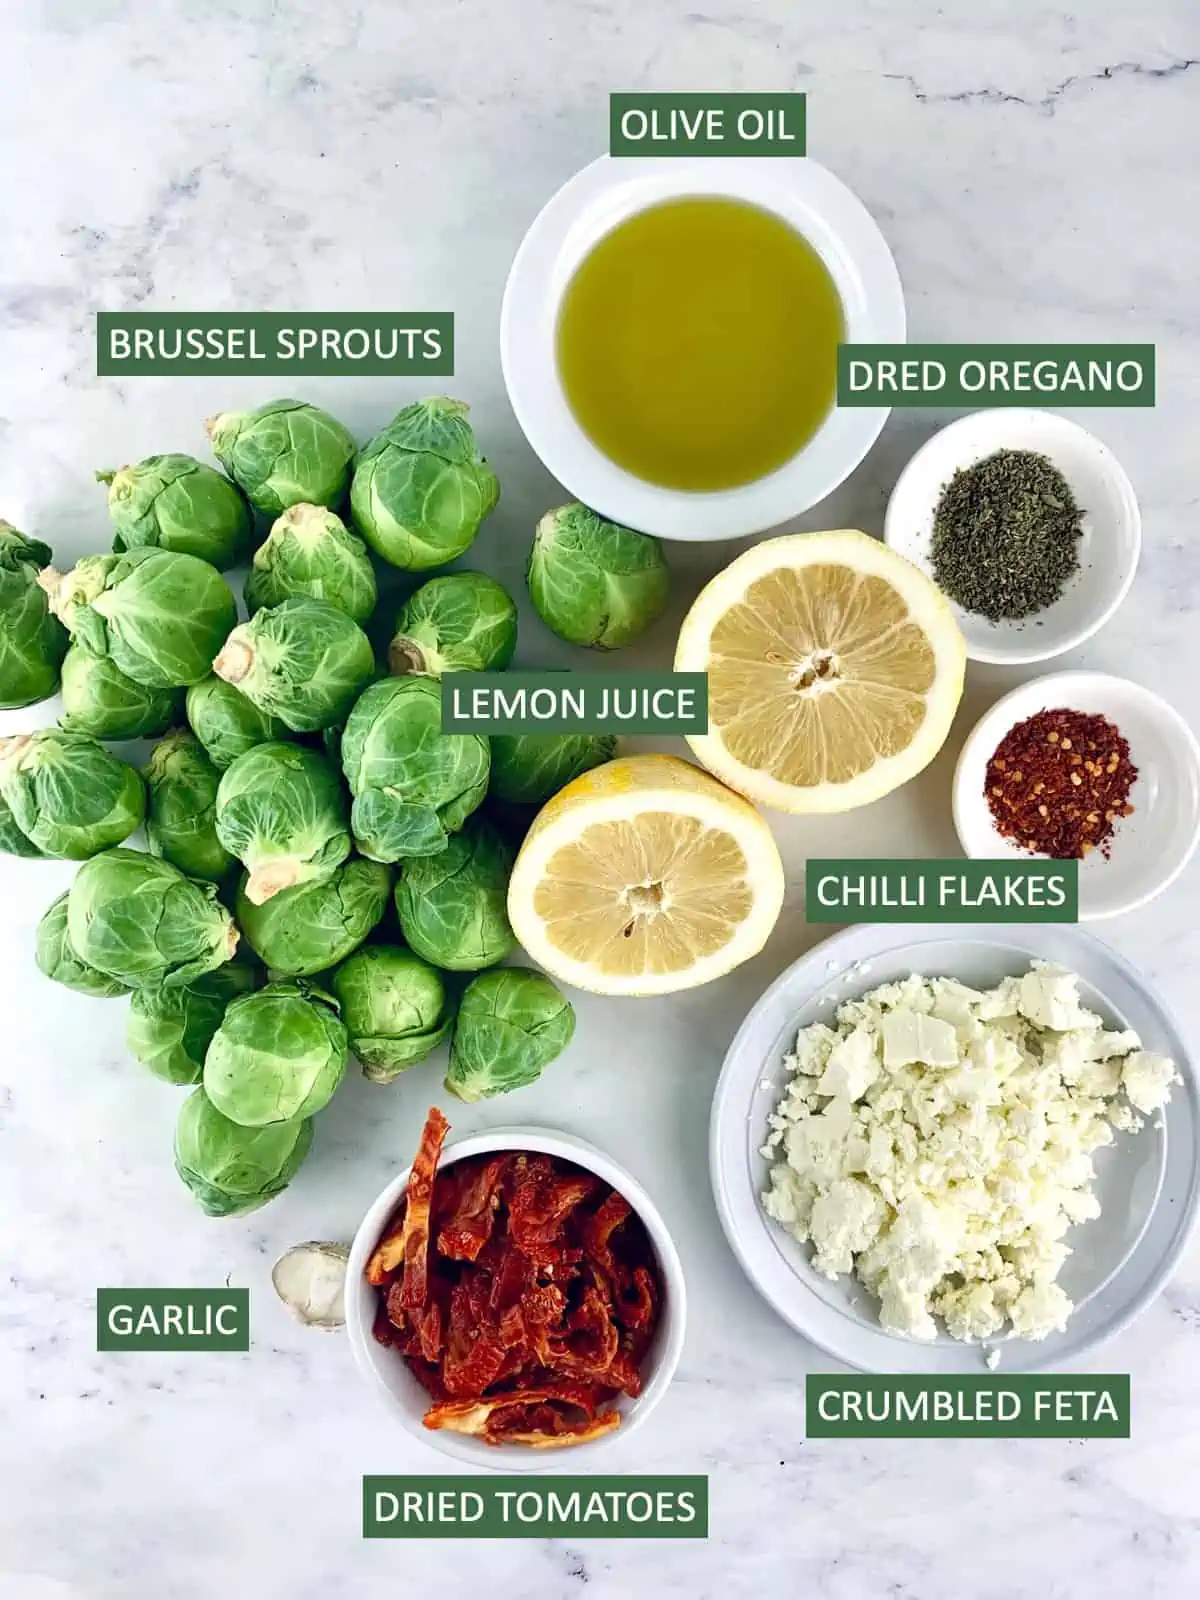 Labelled ingredients needed to make Roasted Brussel Sprout Salad.